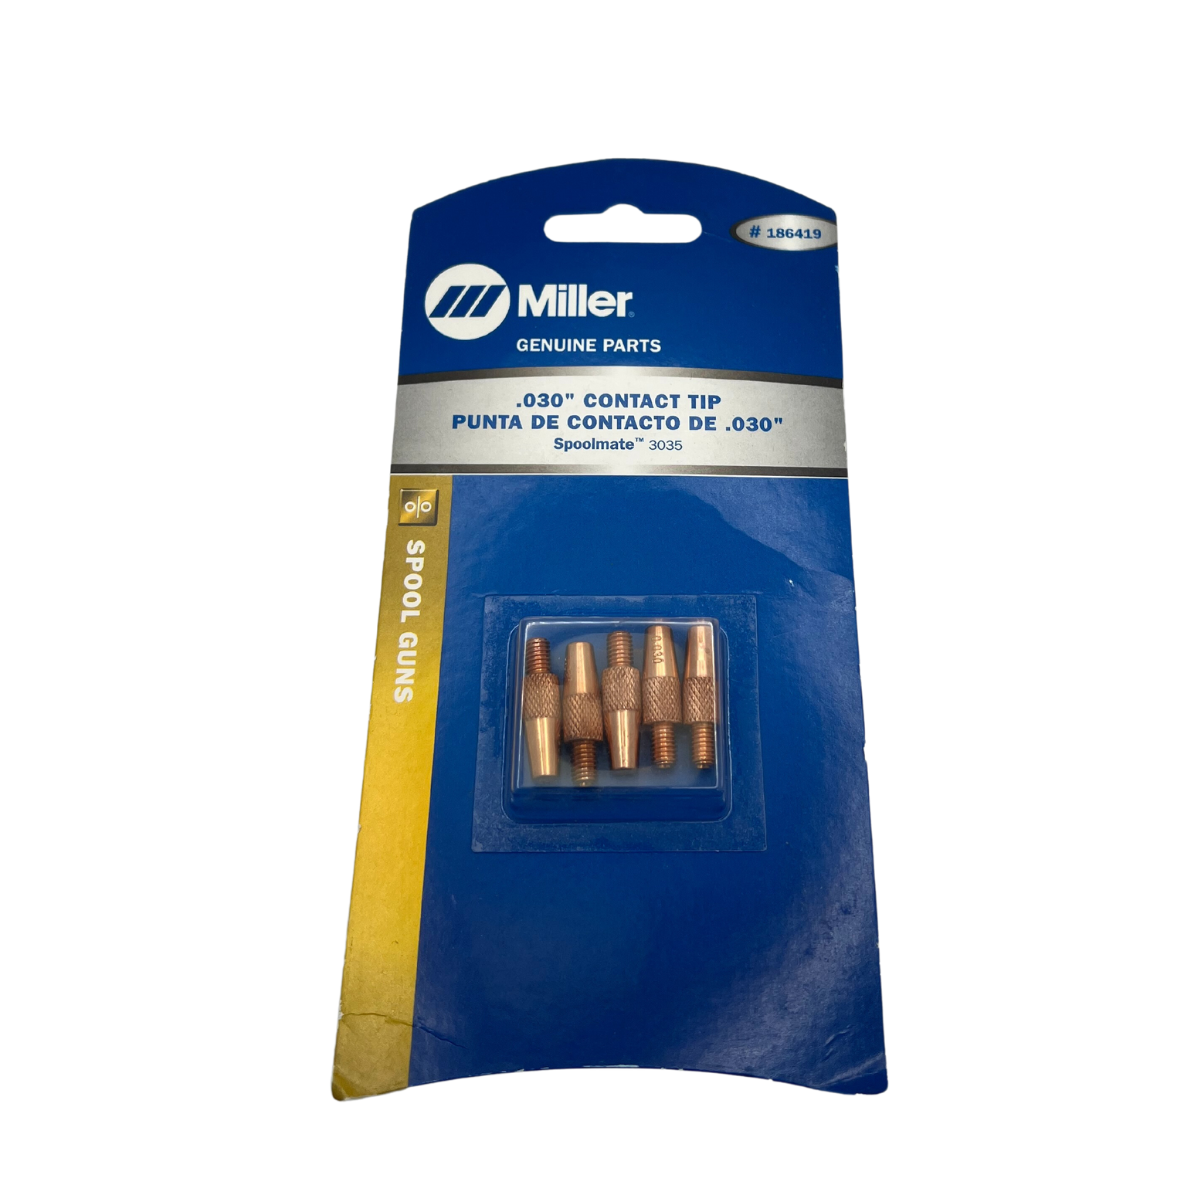 Miller .030" Contact Tips for Spoolmate 100/200/3035- 5/pk- 186419